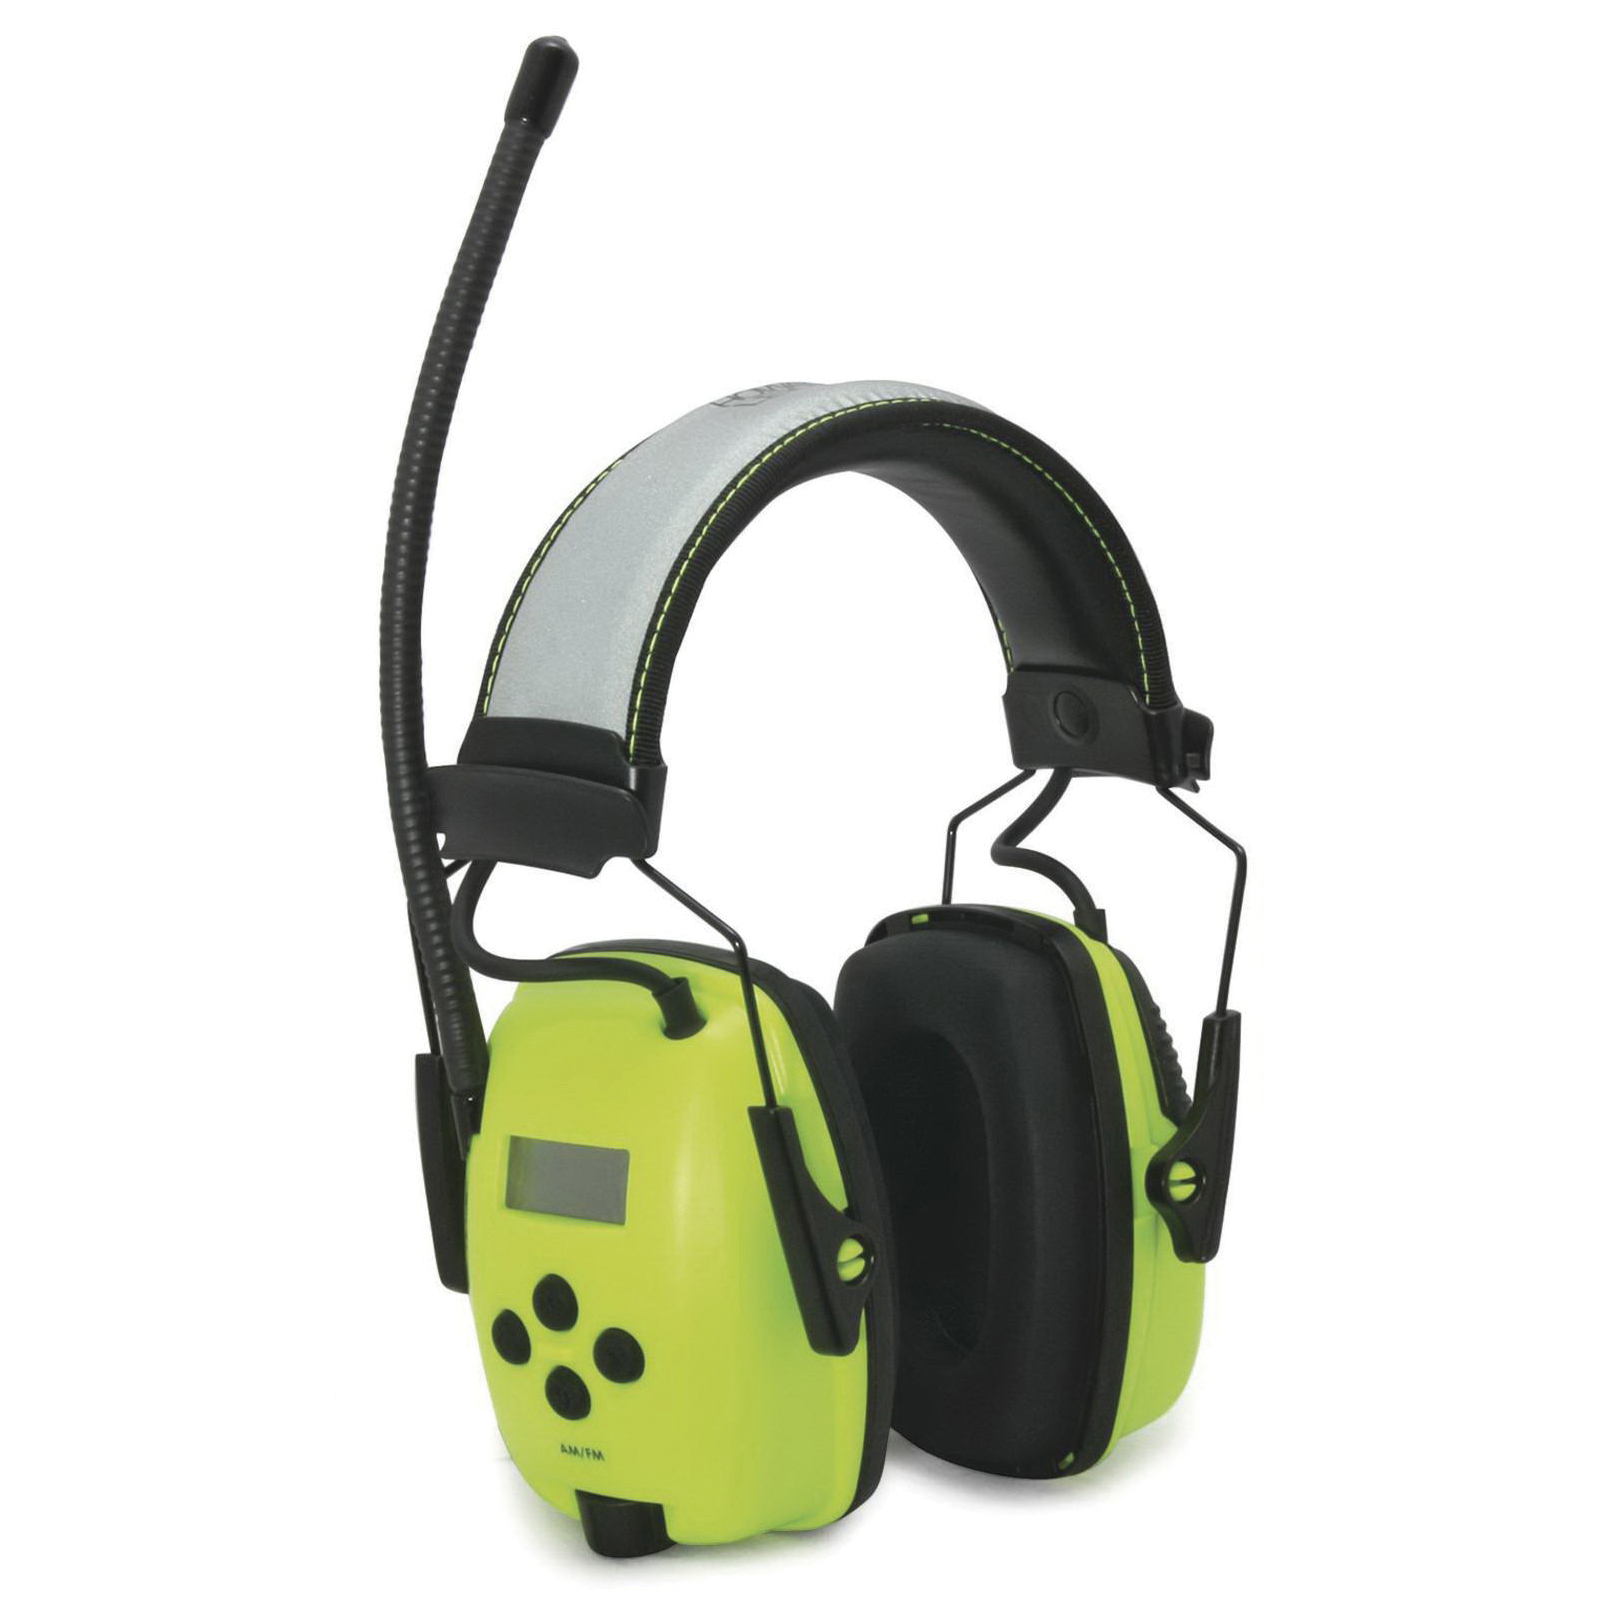 DIAMOND M DM-HP40310 Ear Muffs Hearing Foldable Noise Reduction Protection 